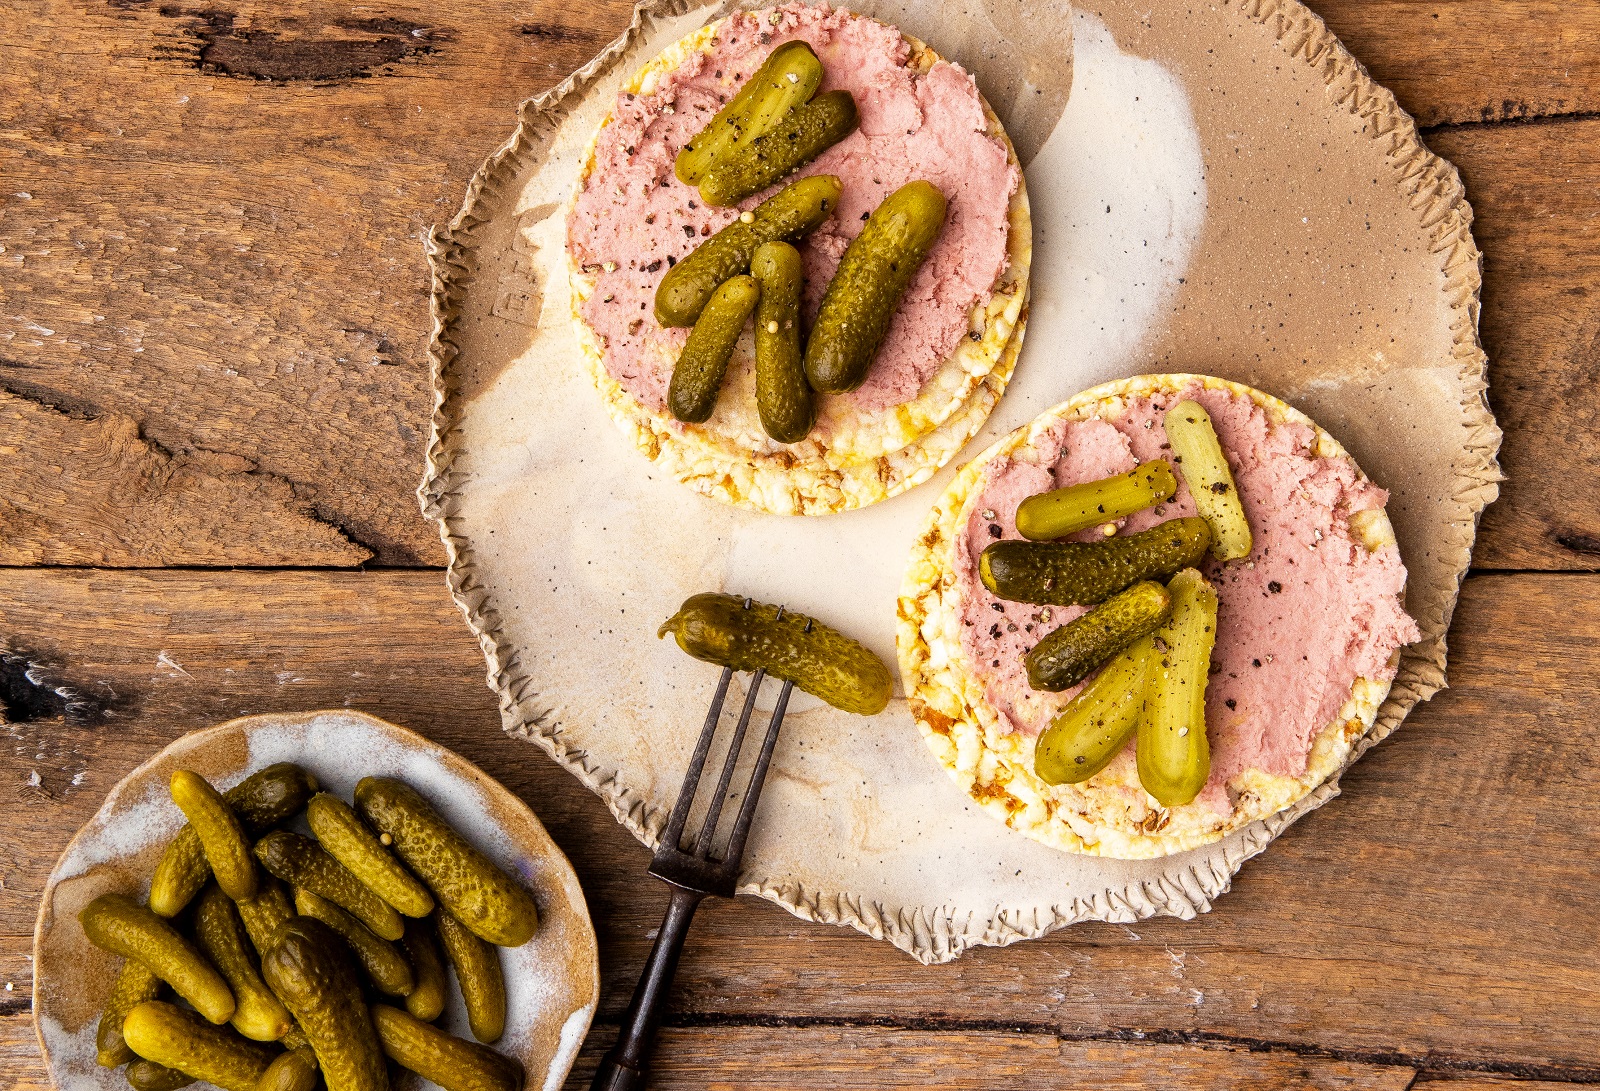 Liverwurst & Cornichons on Corn Thins slices as a snack or for entertaining